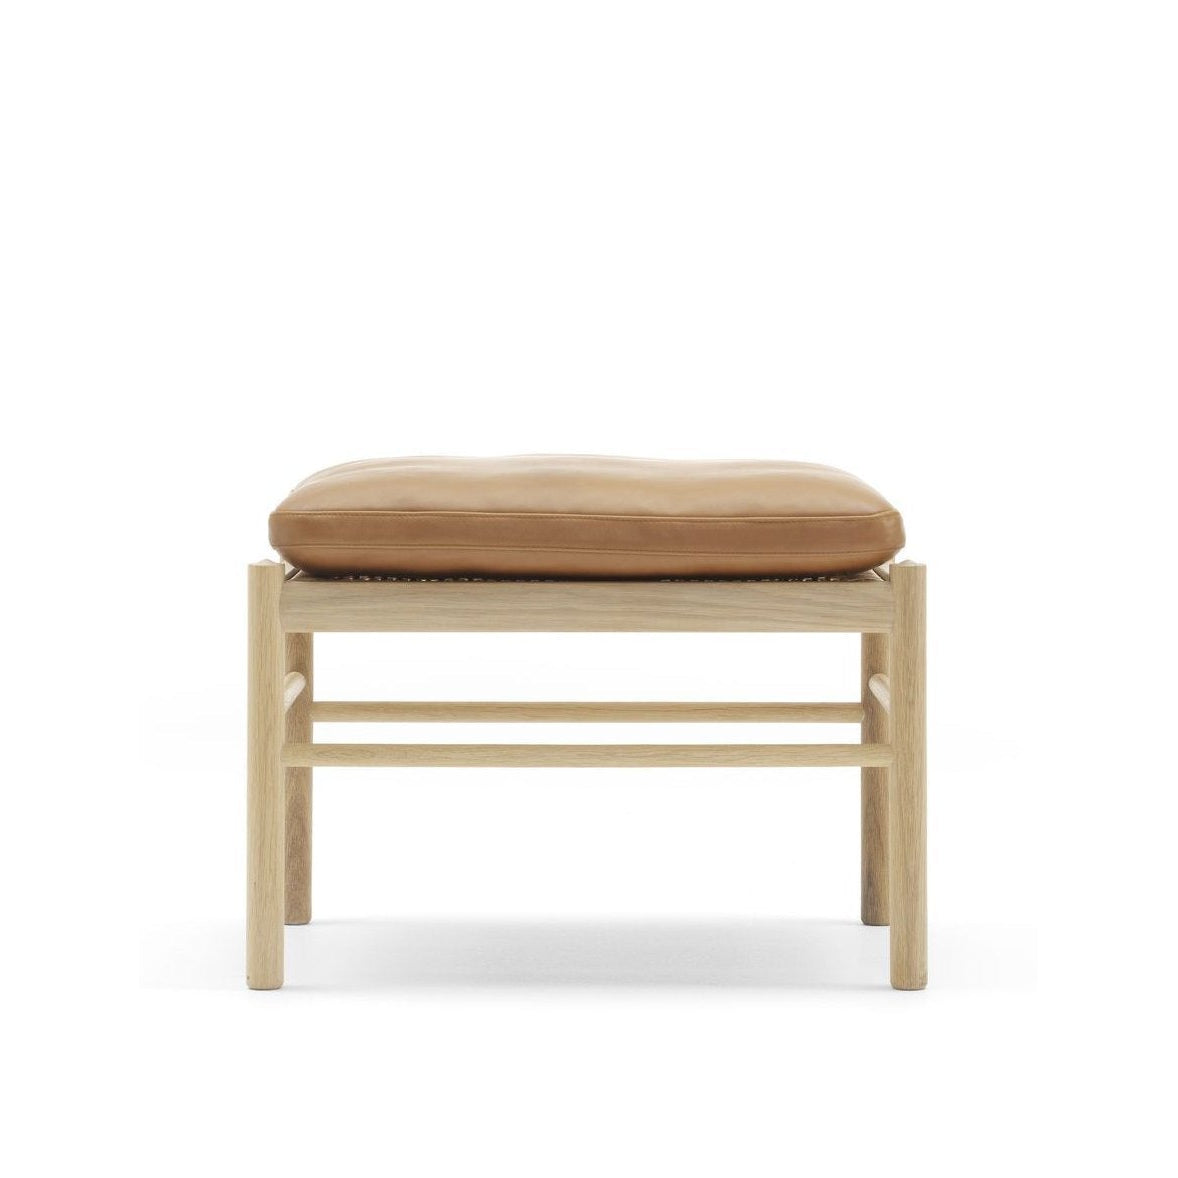 Carl Hansen Ow149 F Colonial Footstool, Soaped Oak/Brown Leather